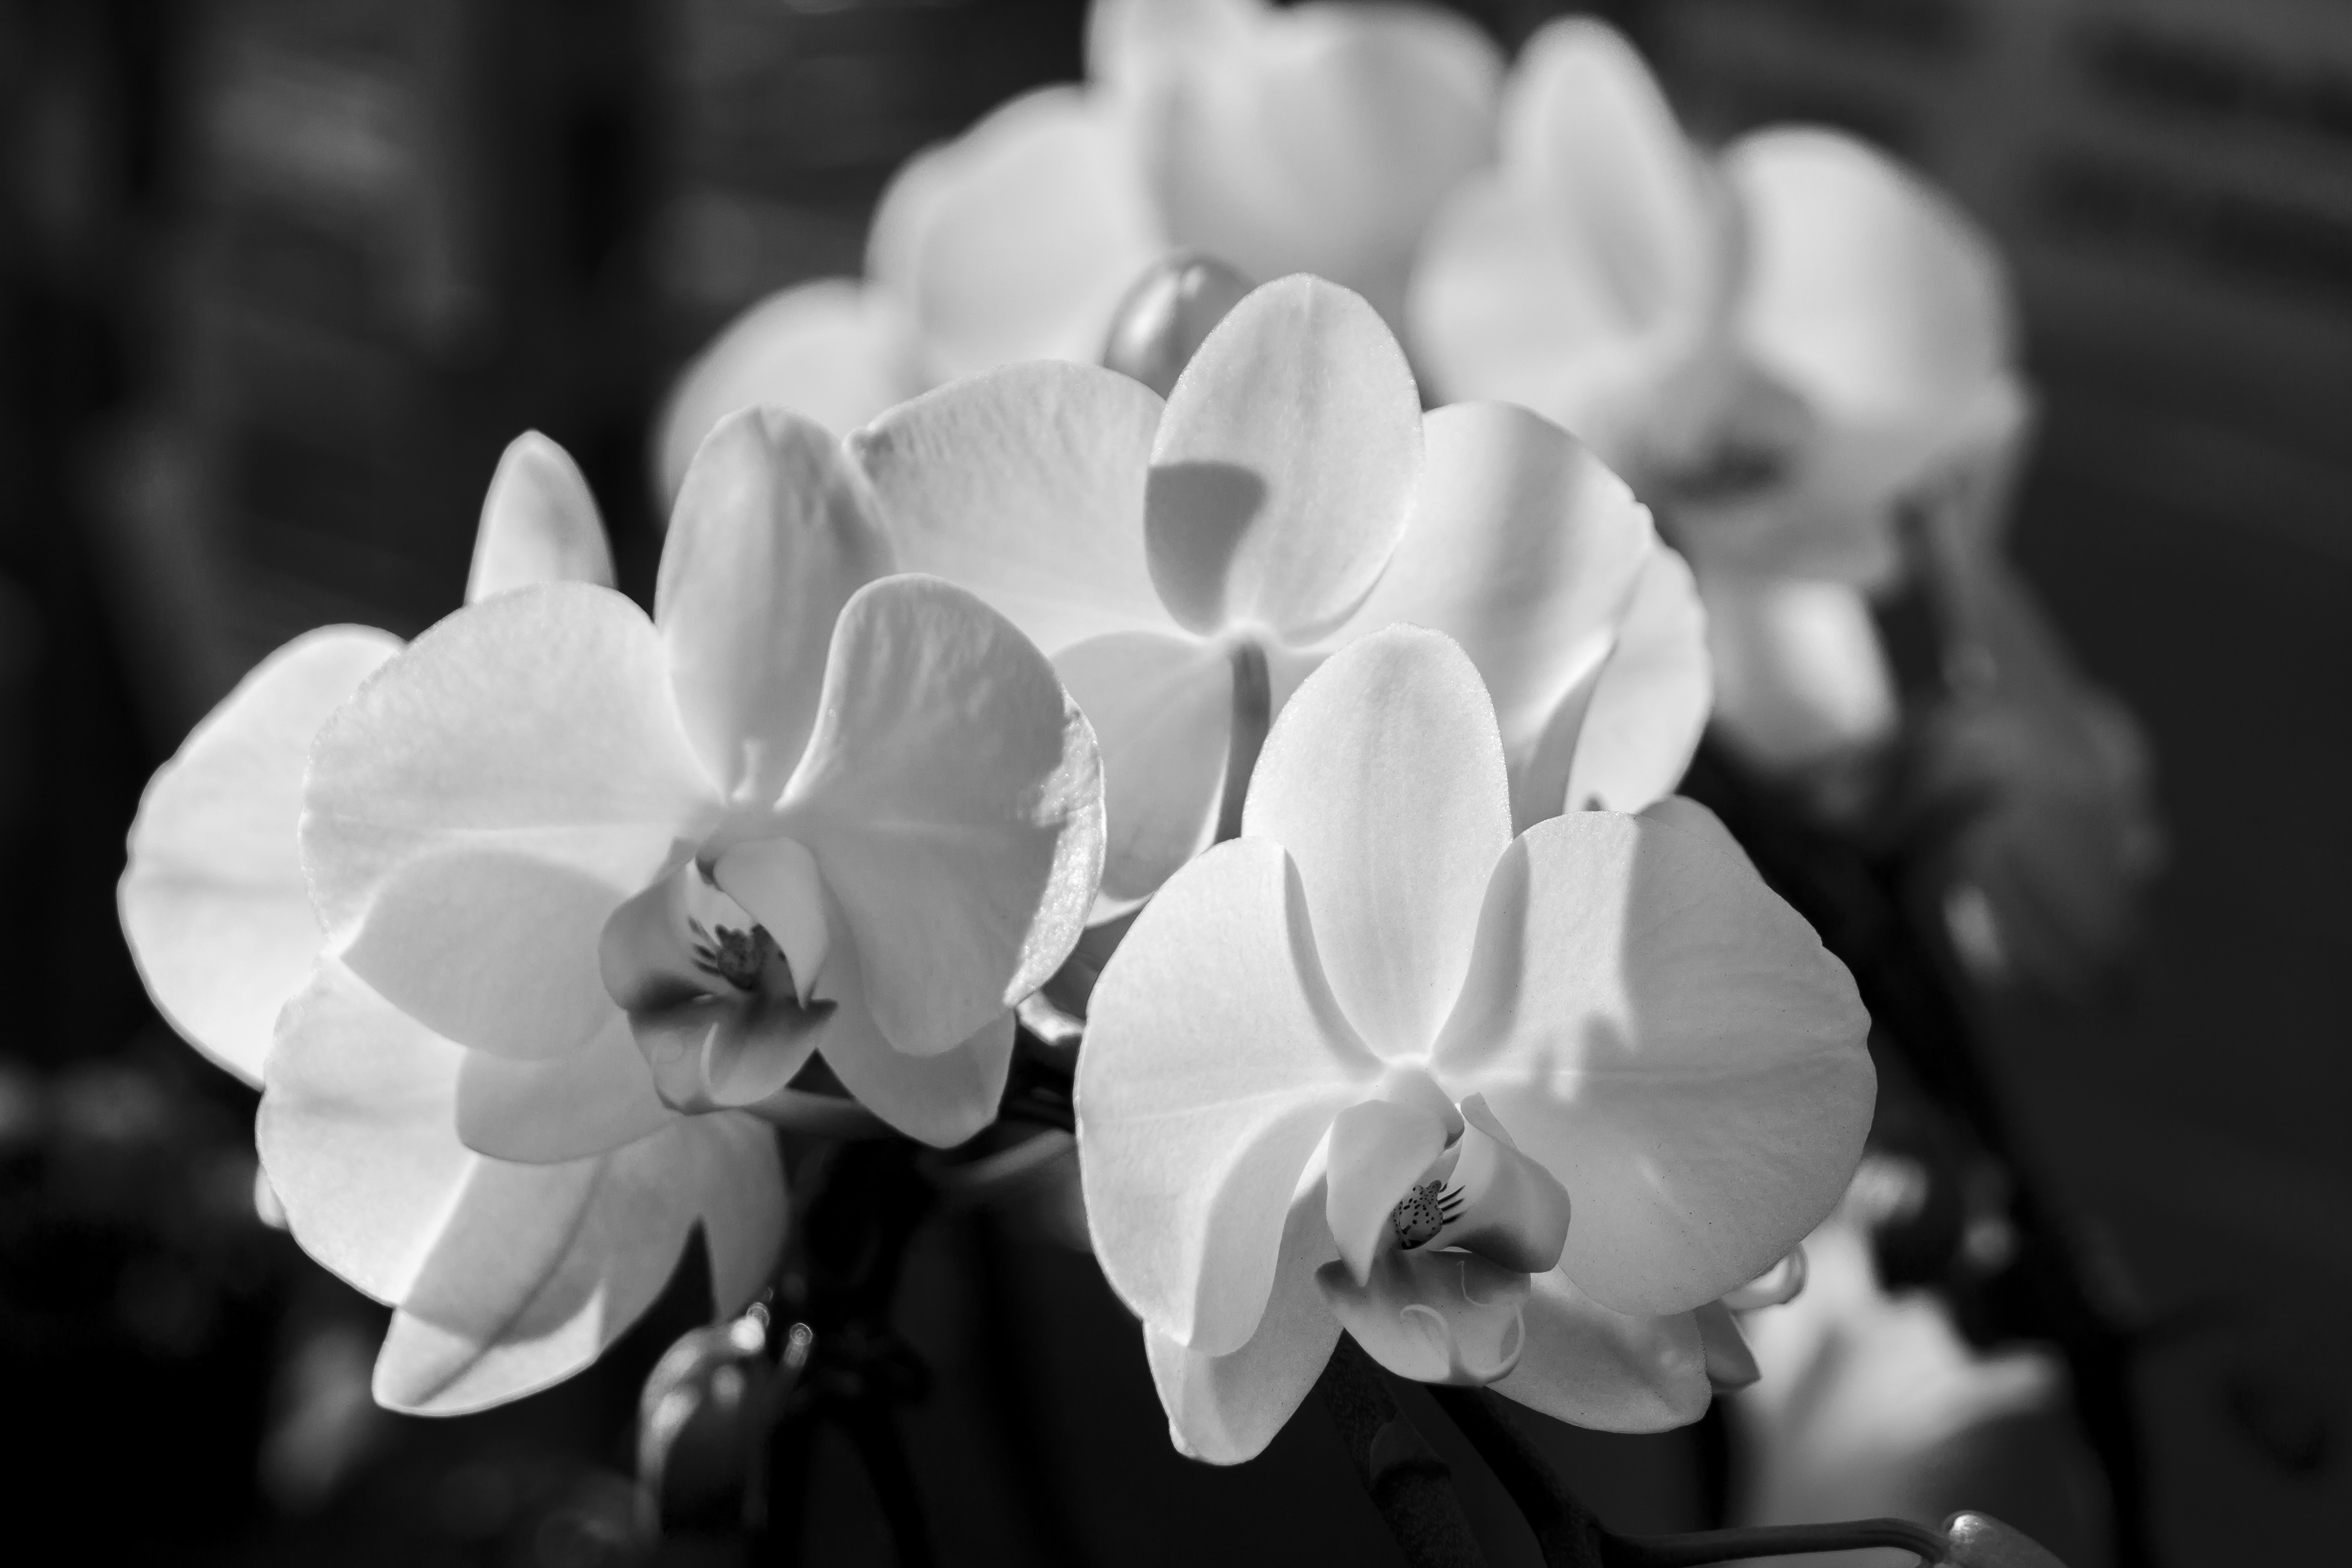 grayscale photo of orchid flowers